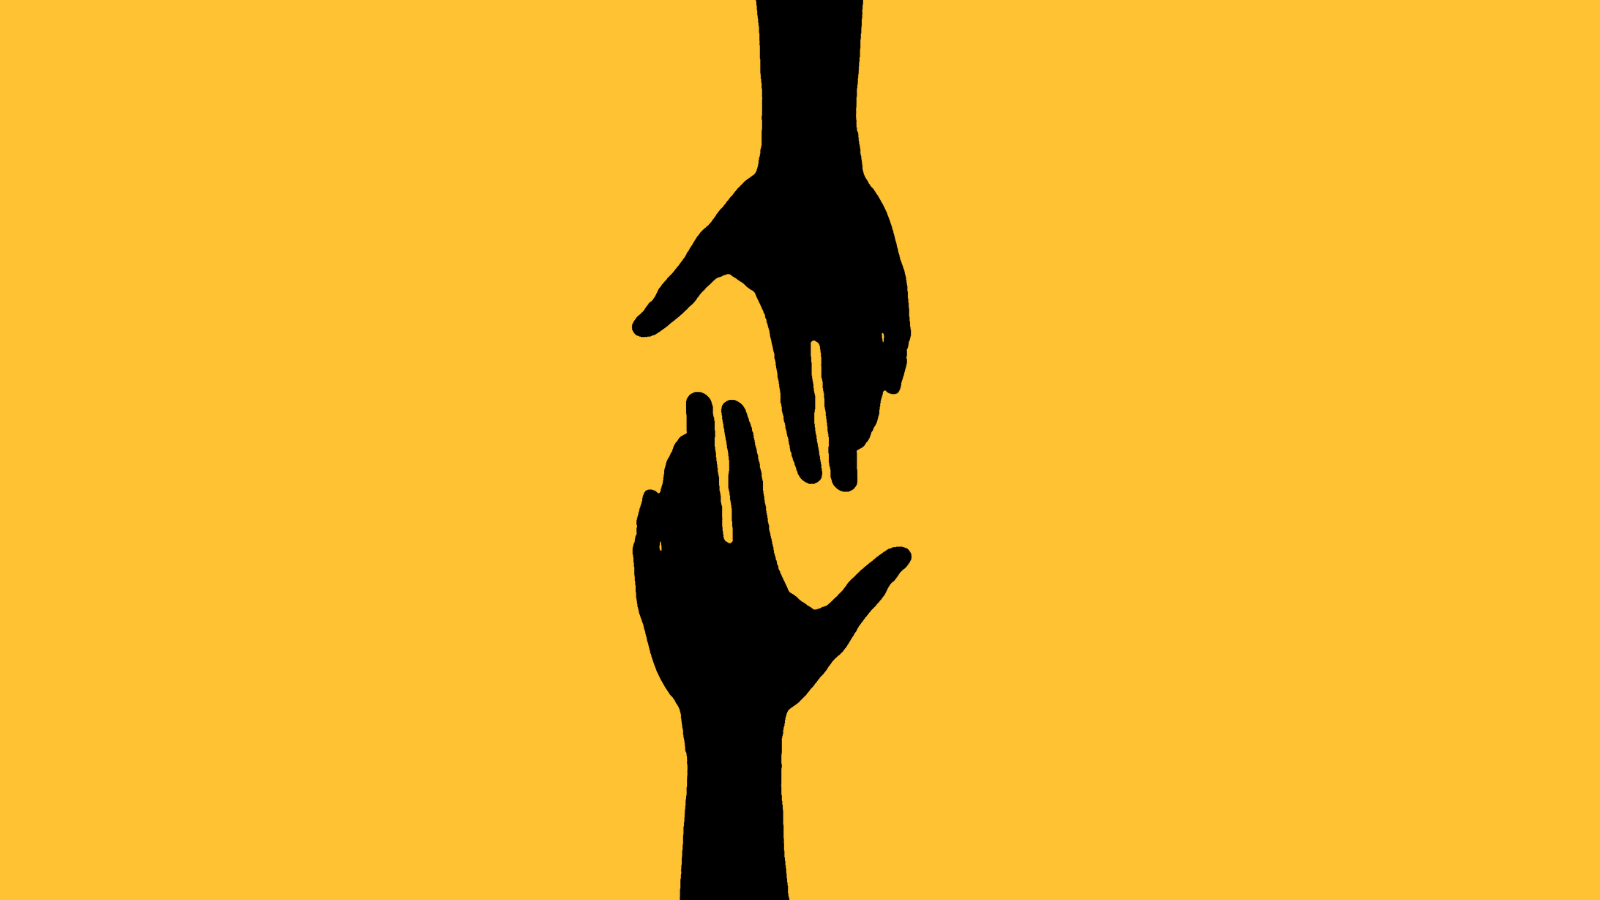 Silhouettes of hands reaching towards each other